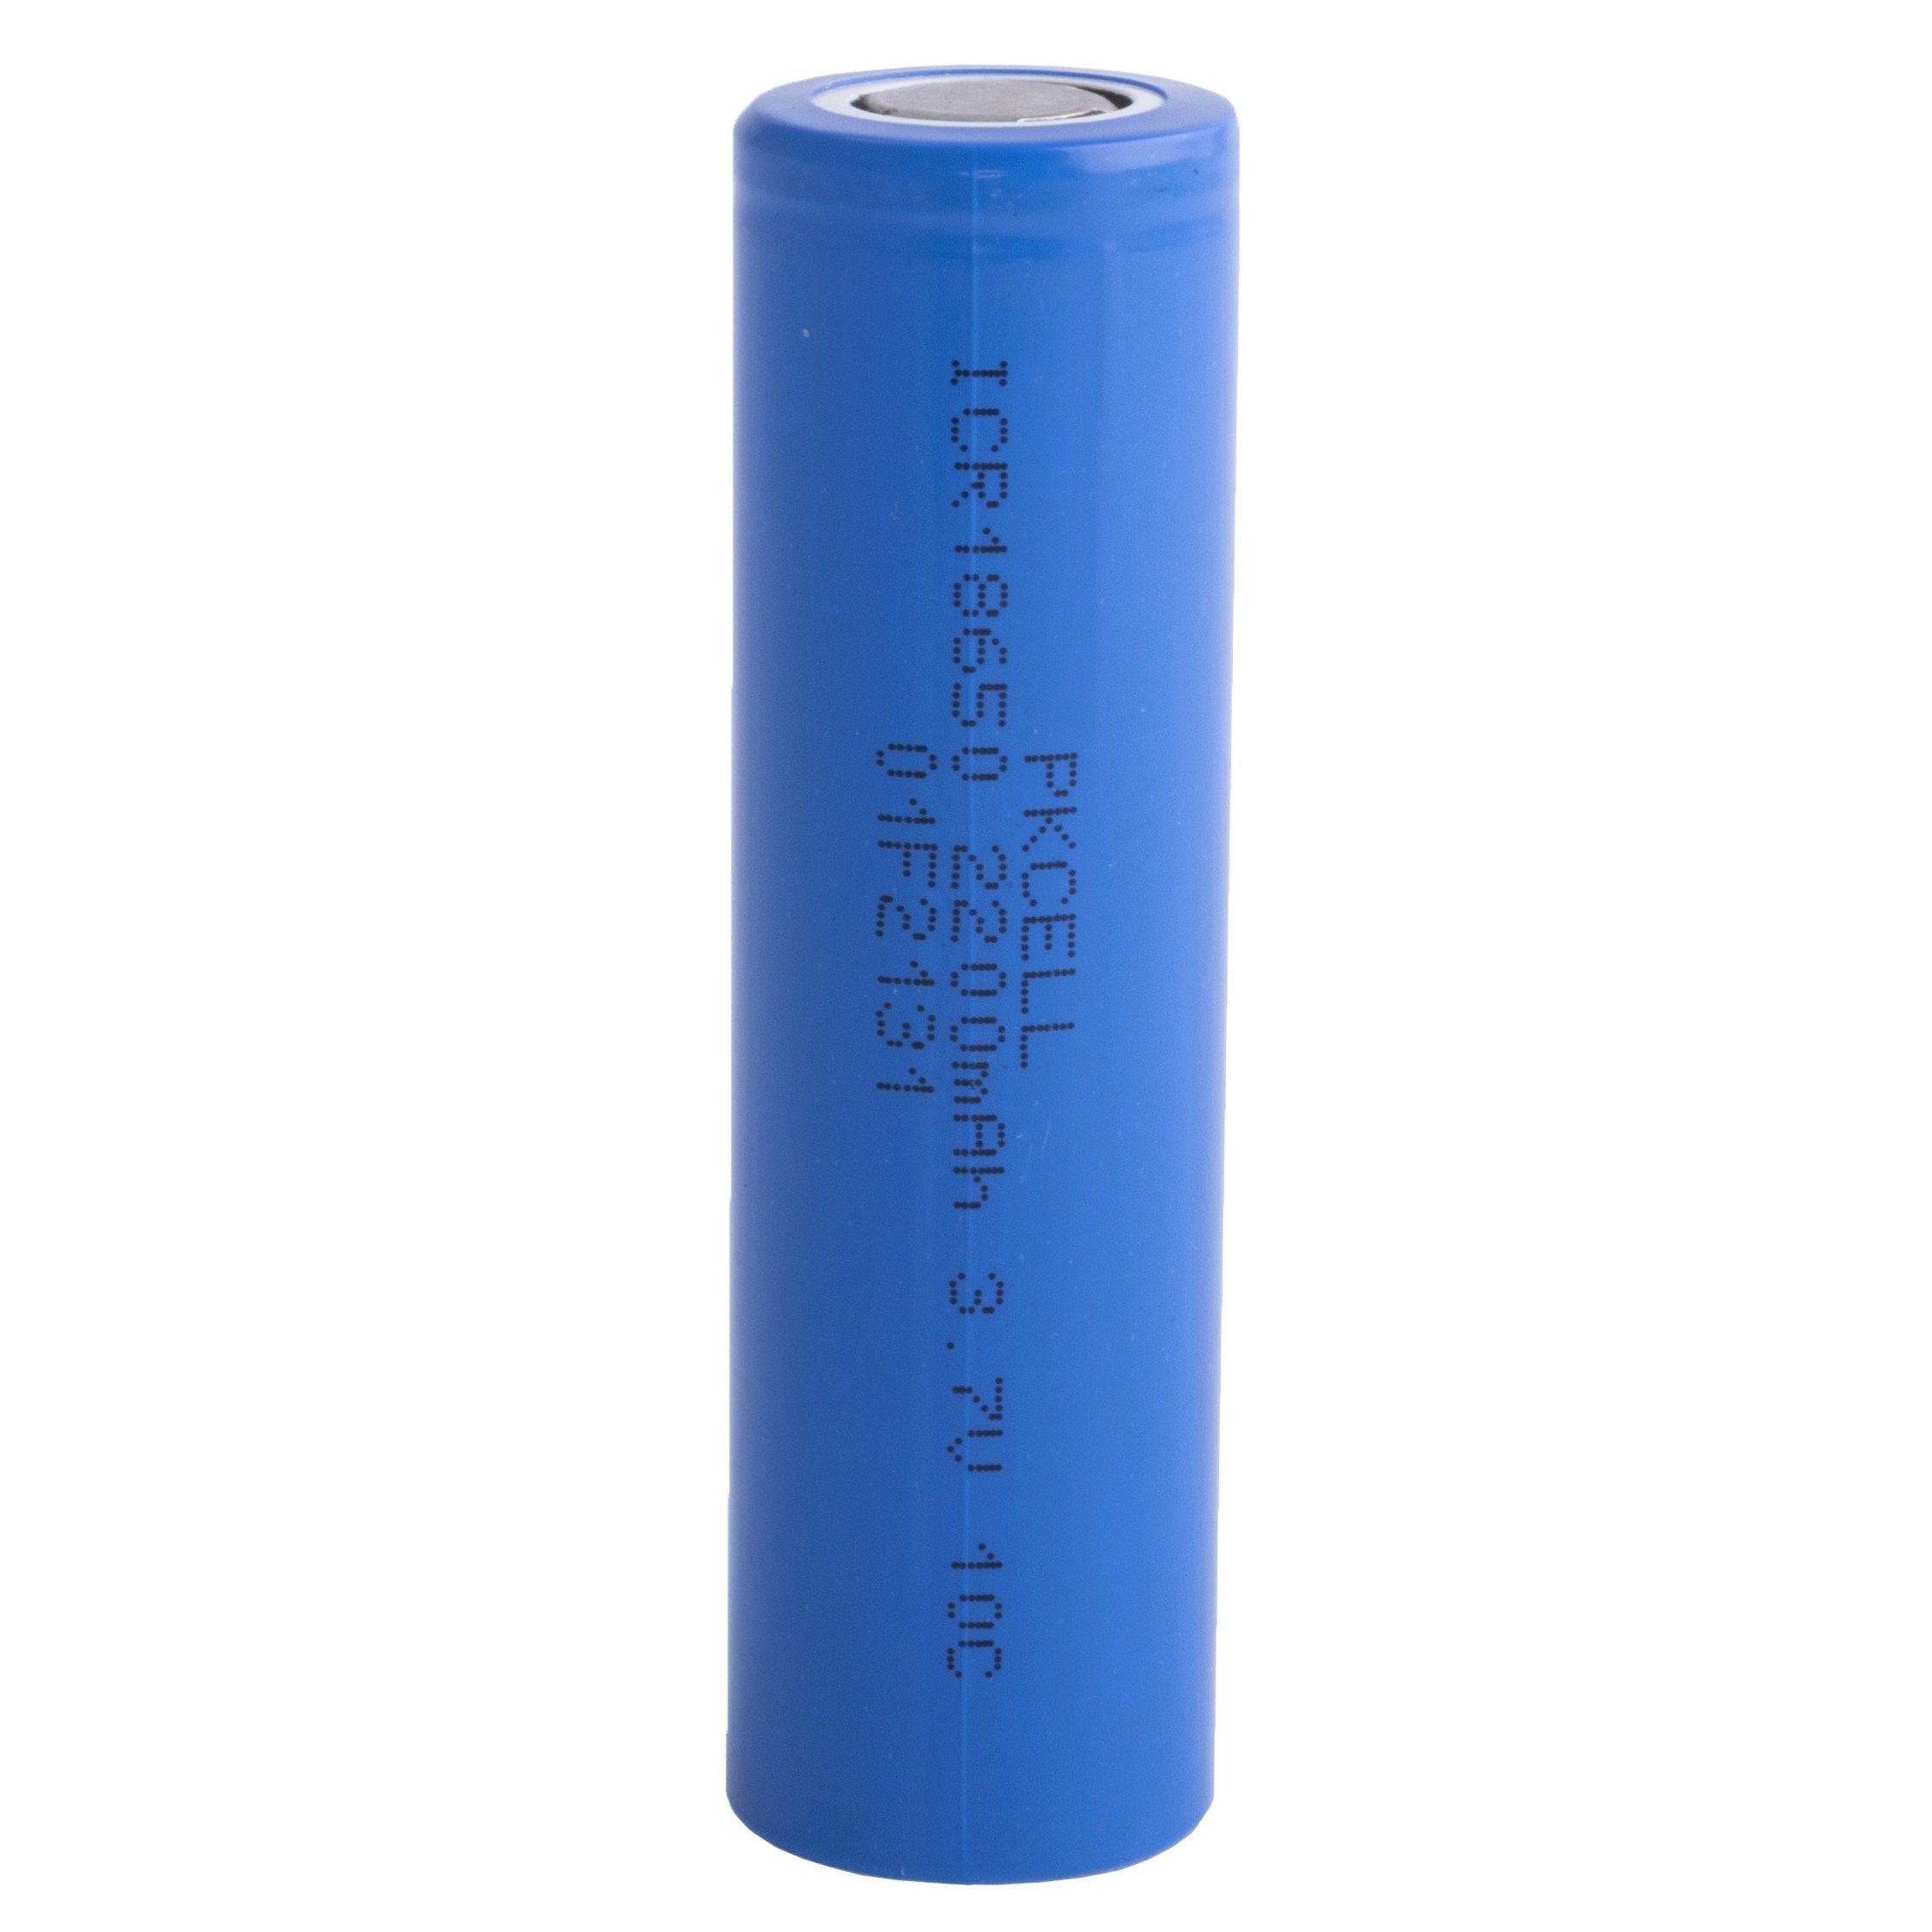 Аккумулятор "18650" 2200 mAh - PKCELL (ICR18650, 10C high discharge rate,2200mAh ,without PCB)